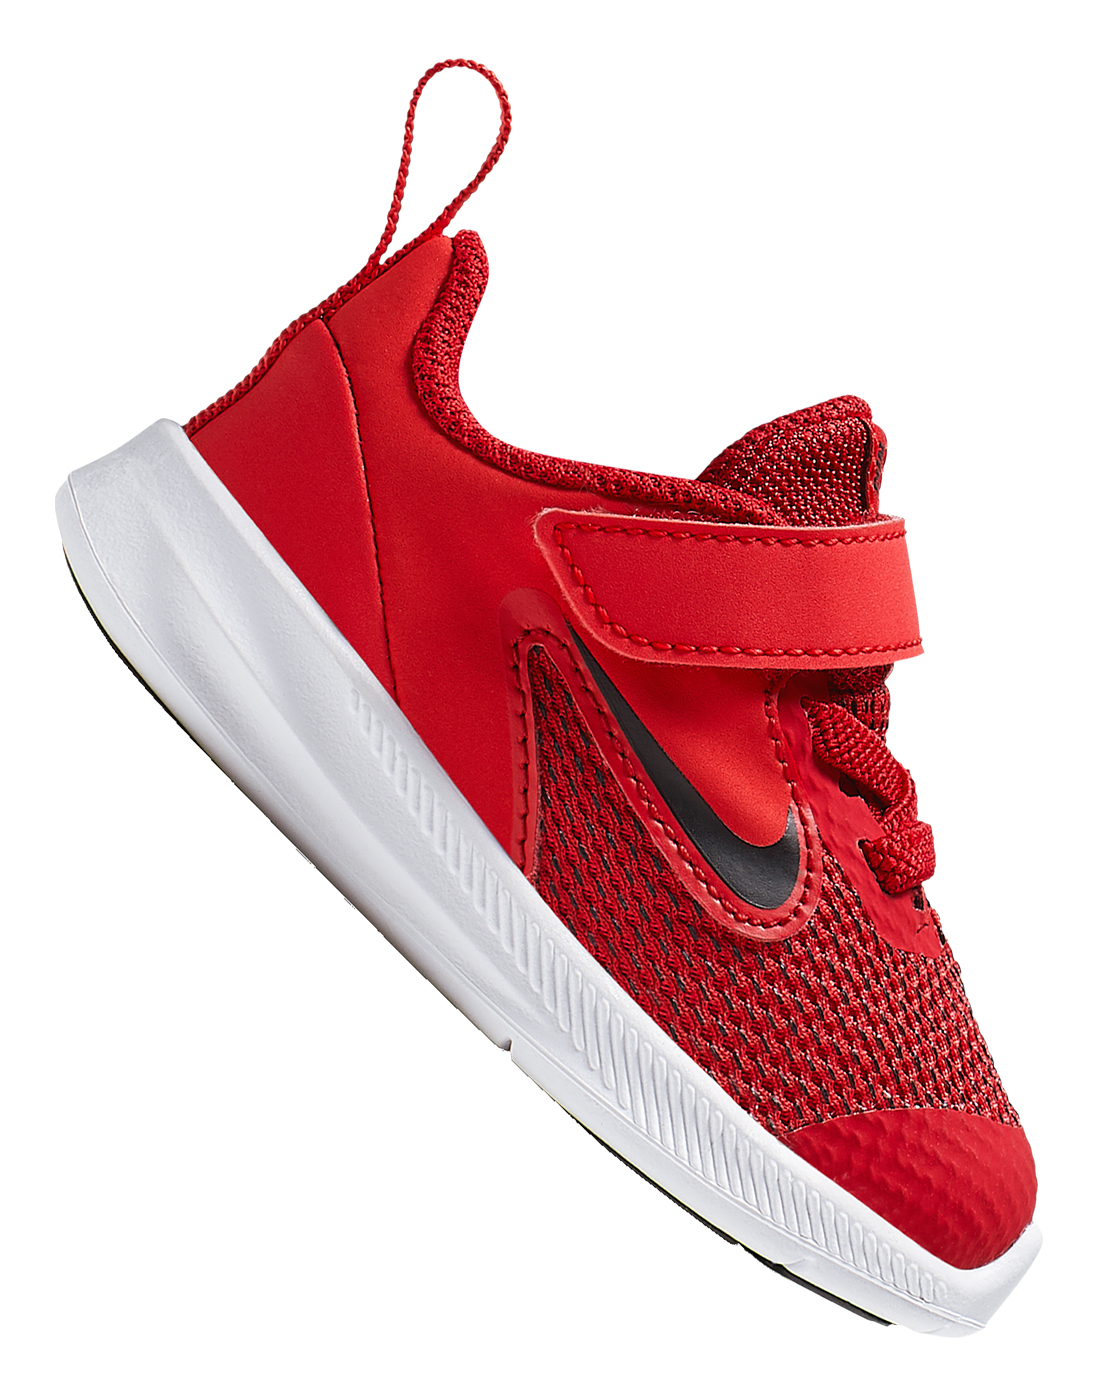 Nike Infant Downshifter - Red | Life Style Sports UK